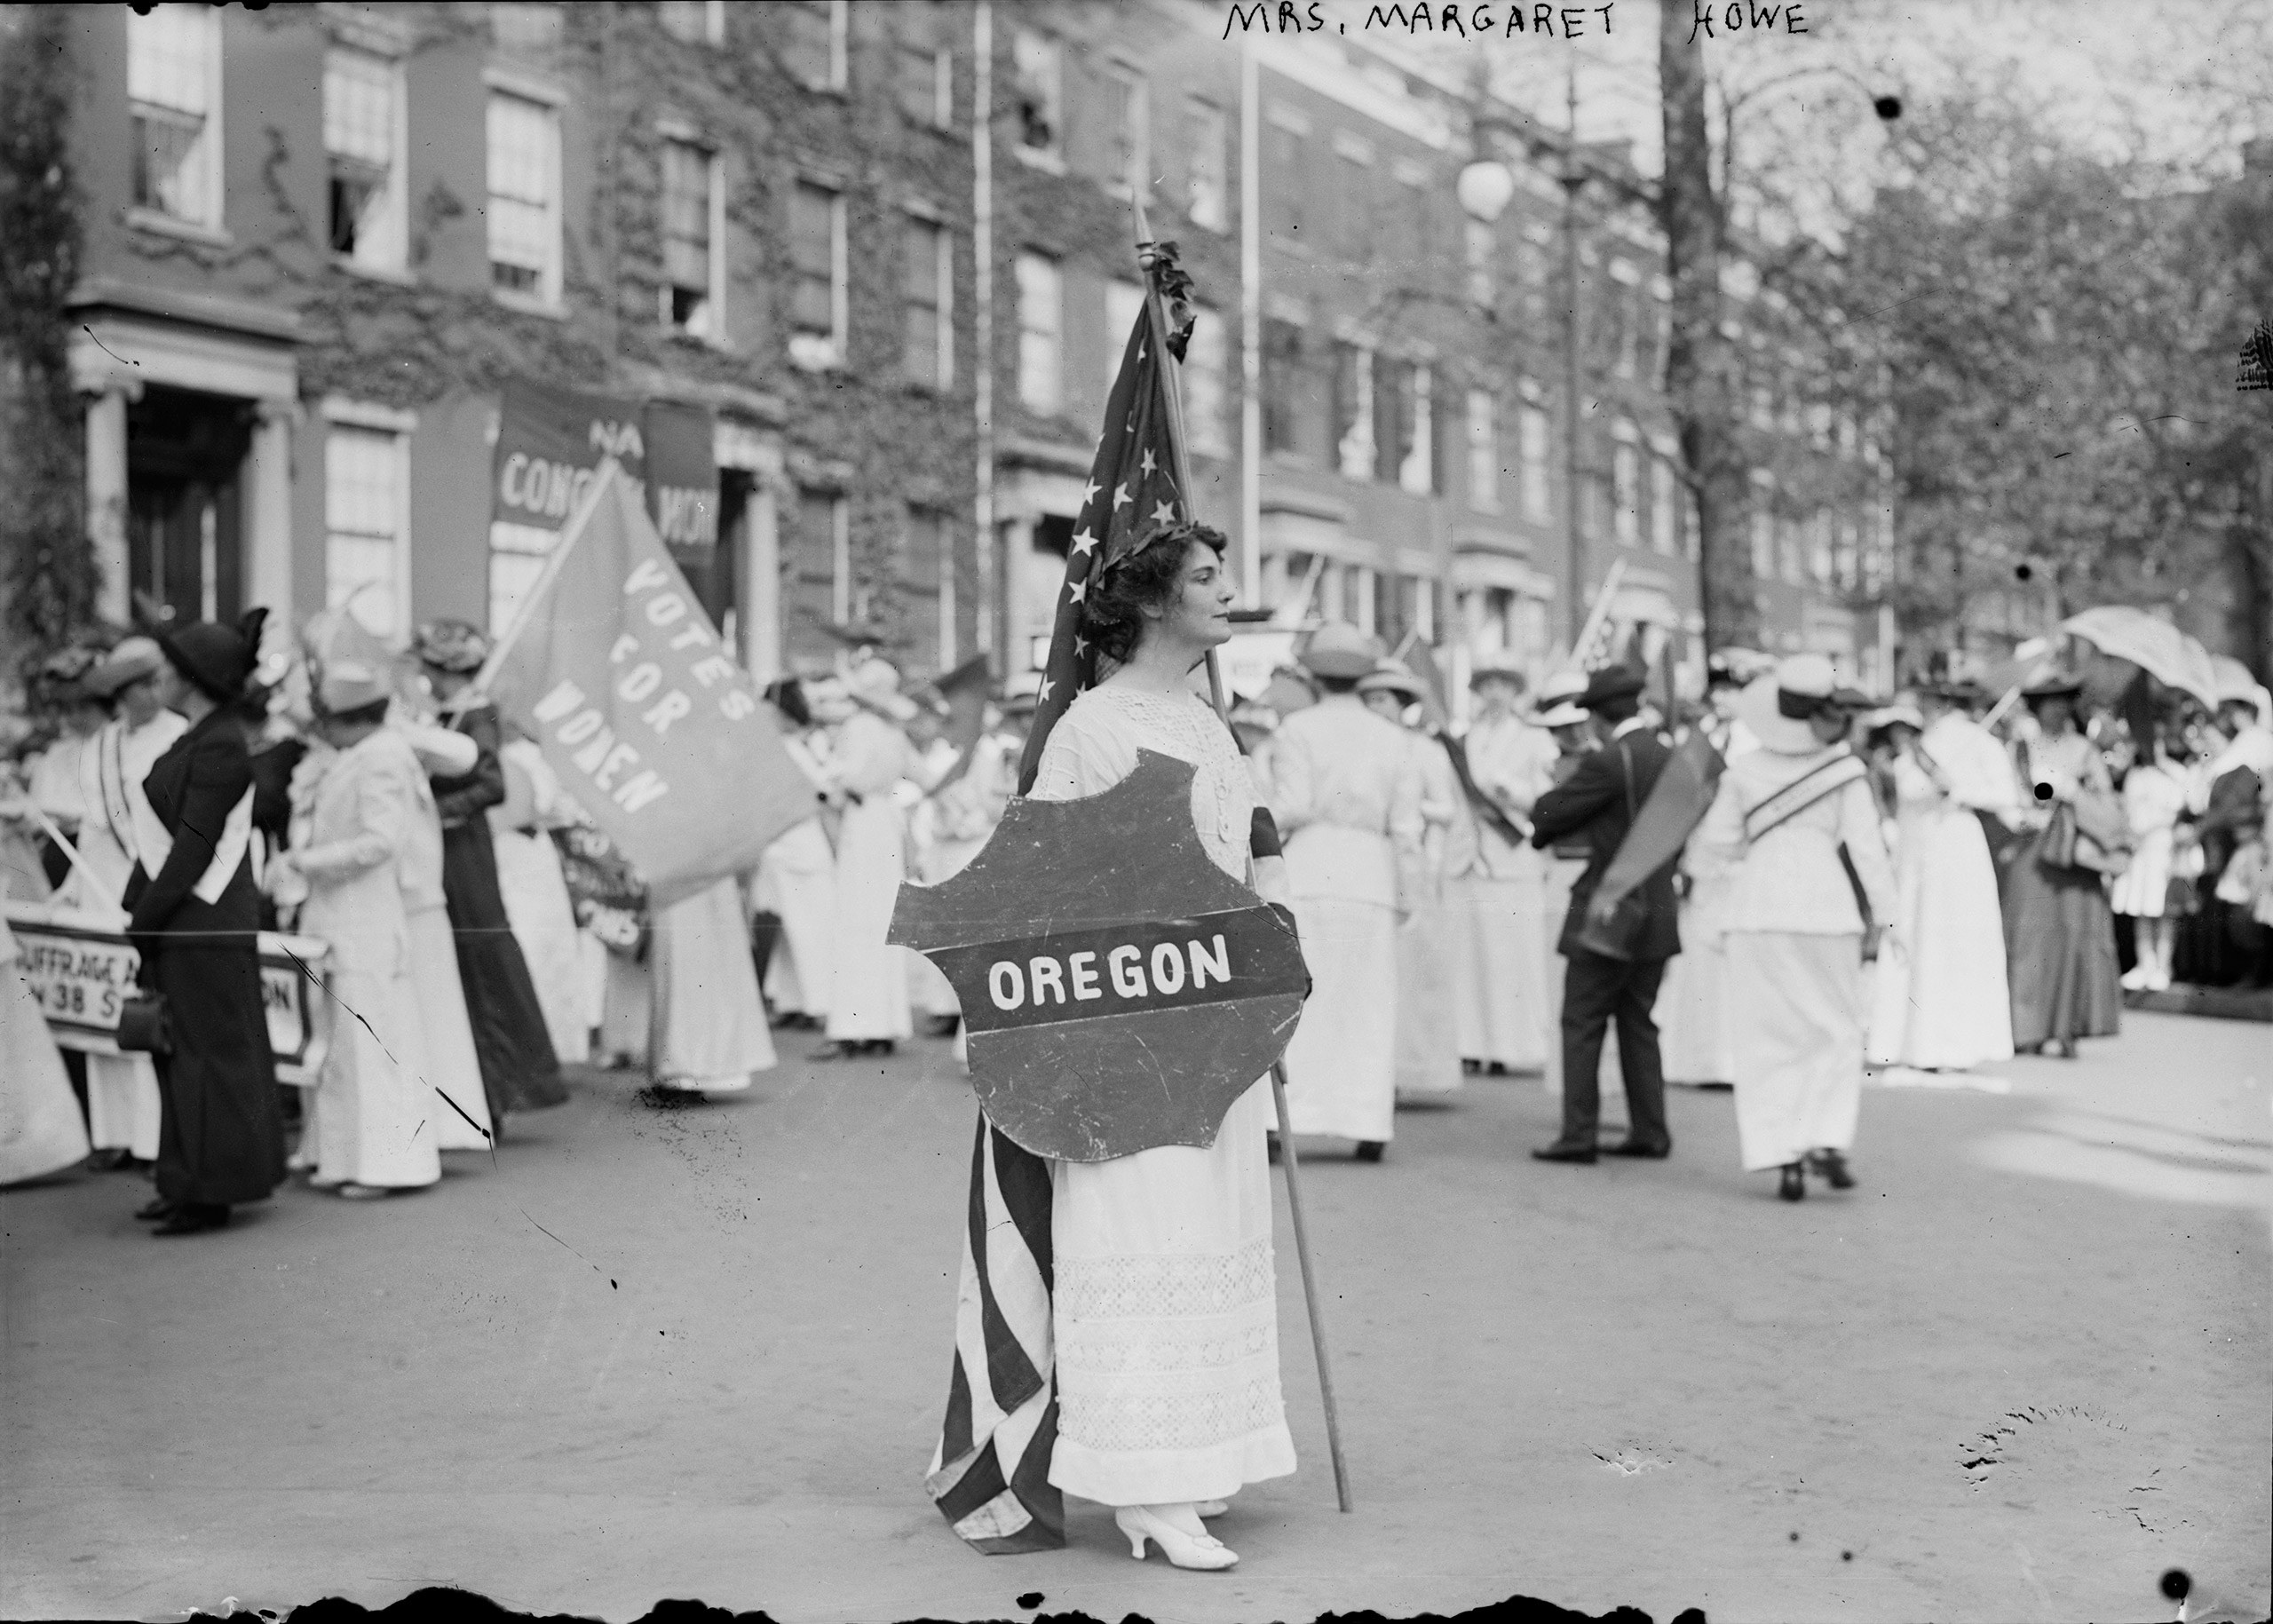 Margaret Vale Howe, a participant in the suffrage parade in Washington, D.C., March 1913.